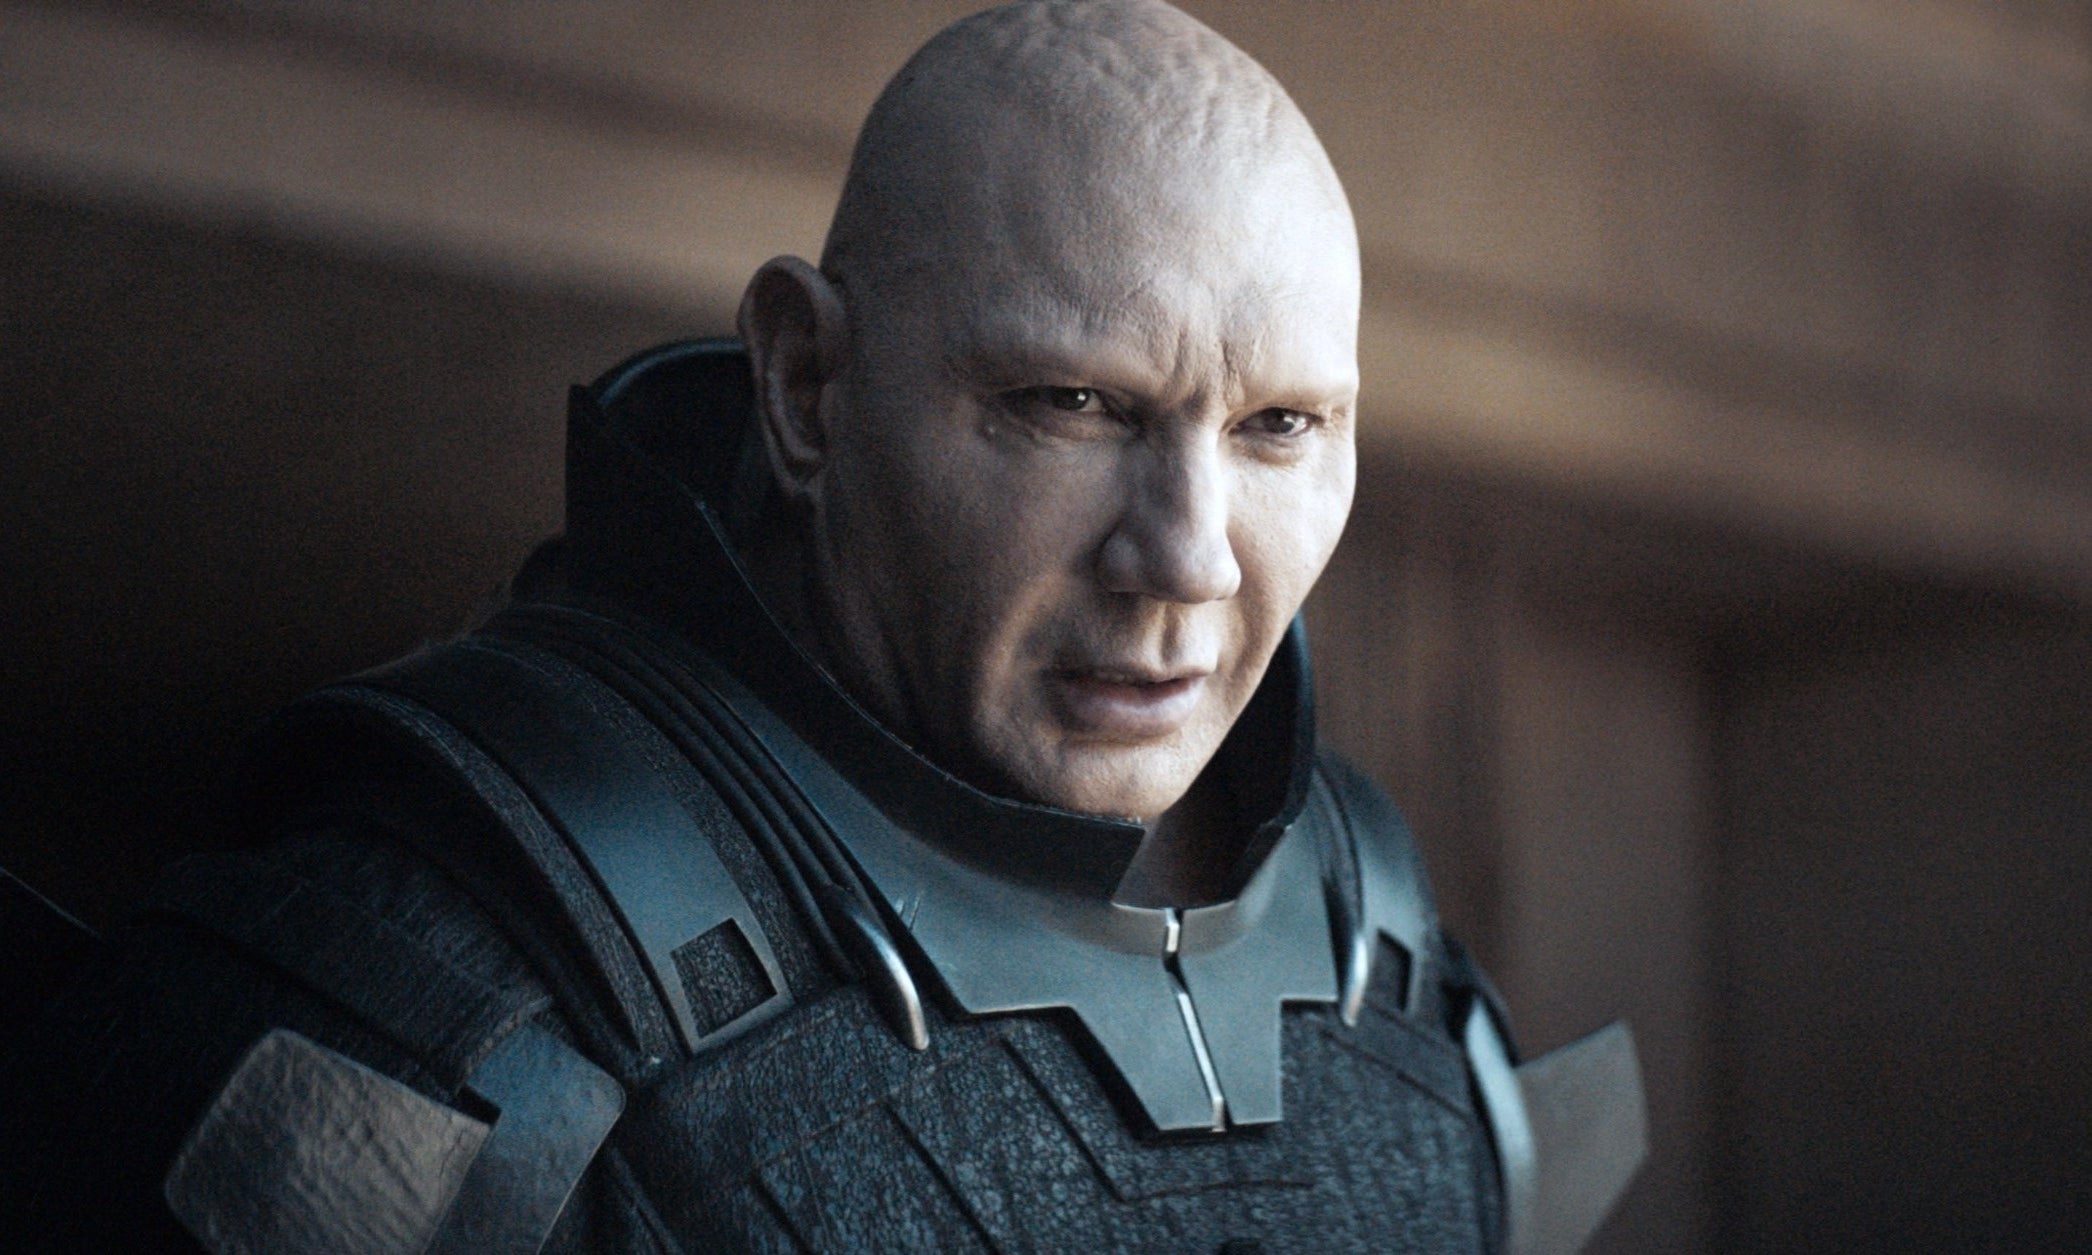 Actor in character as a bald, futuristic warrior in armor, intense expression, scene from a TV or movie